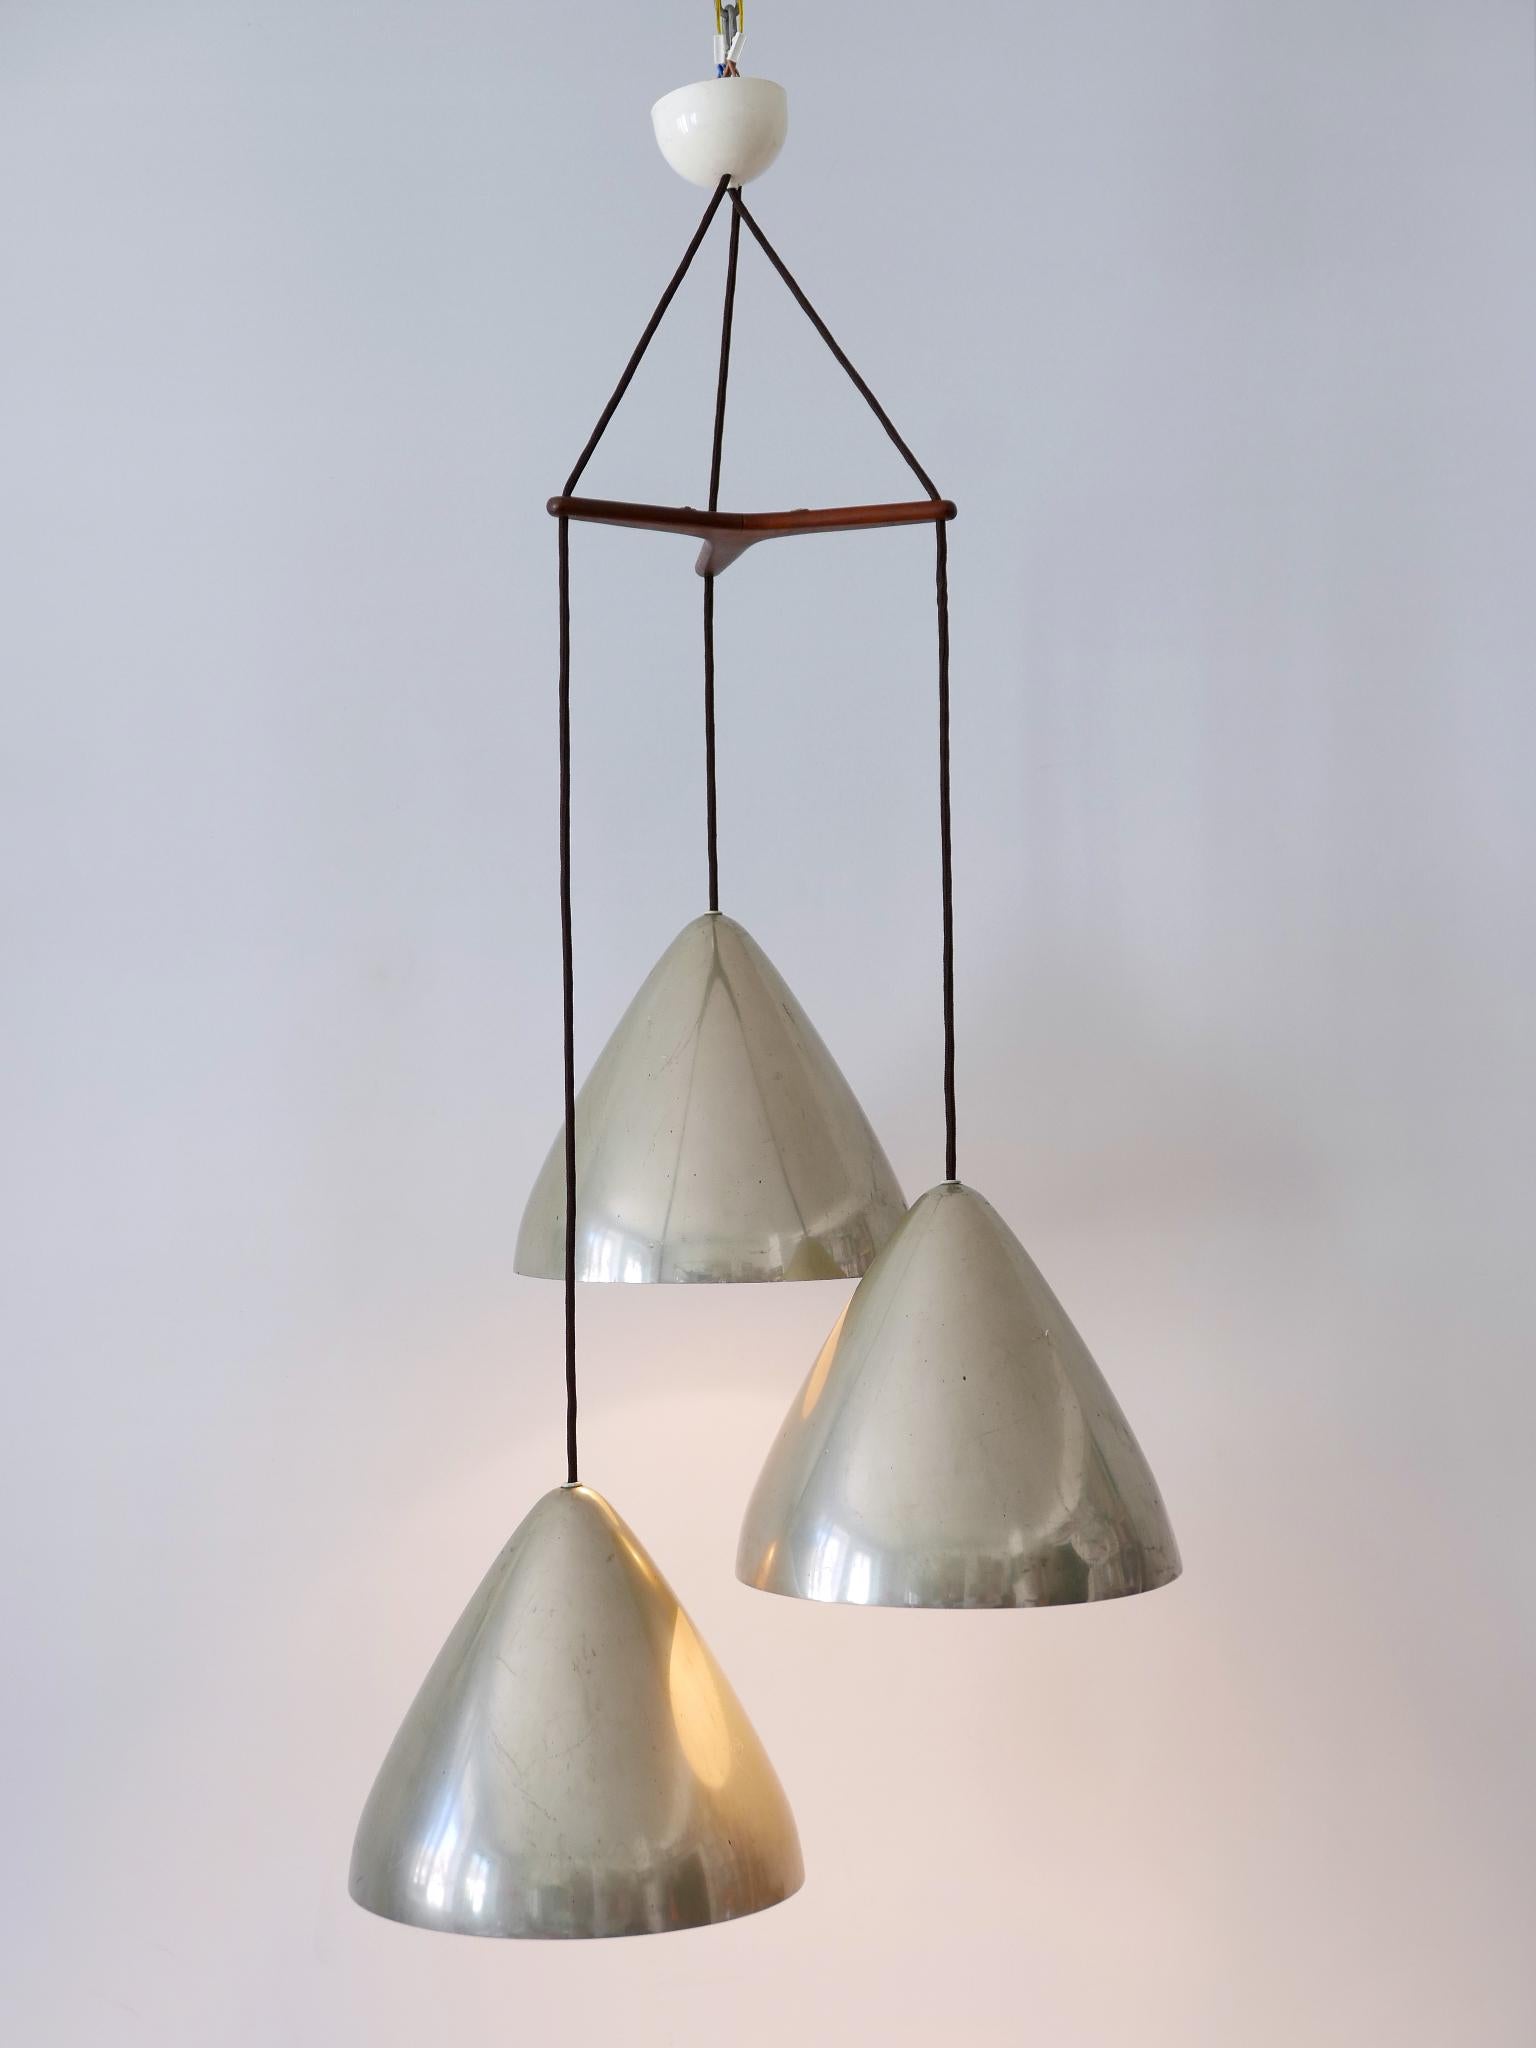 Mid-20th Century Elegant Cascading Pendant Lamp by Lisa Johansson-Pape for Orno Finland 1960s For Sale